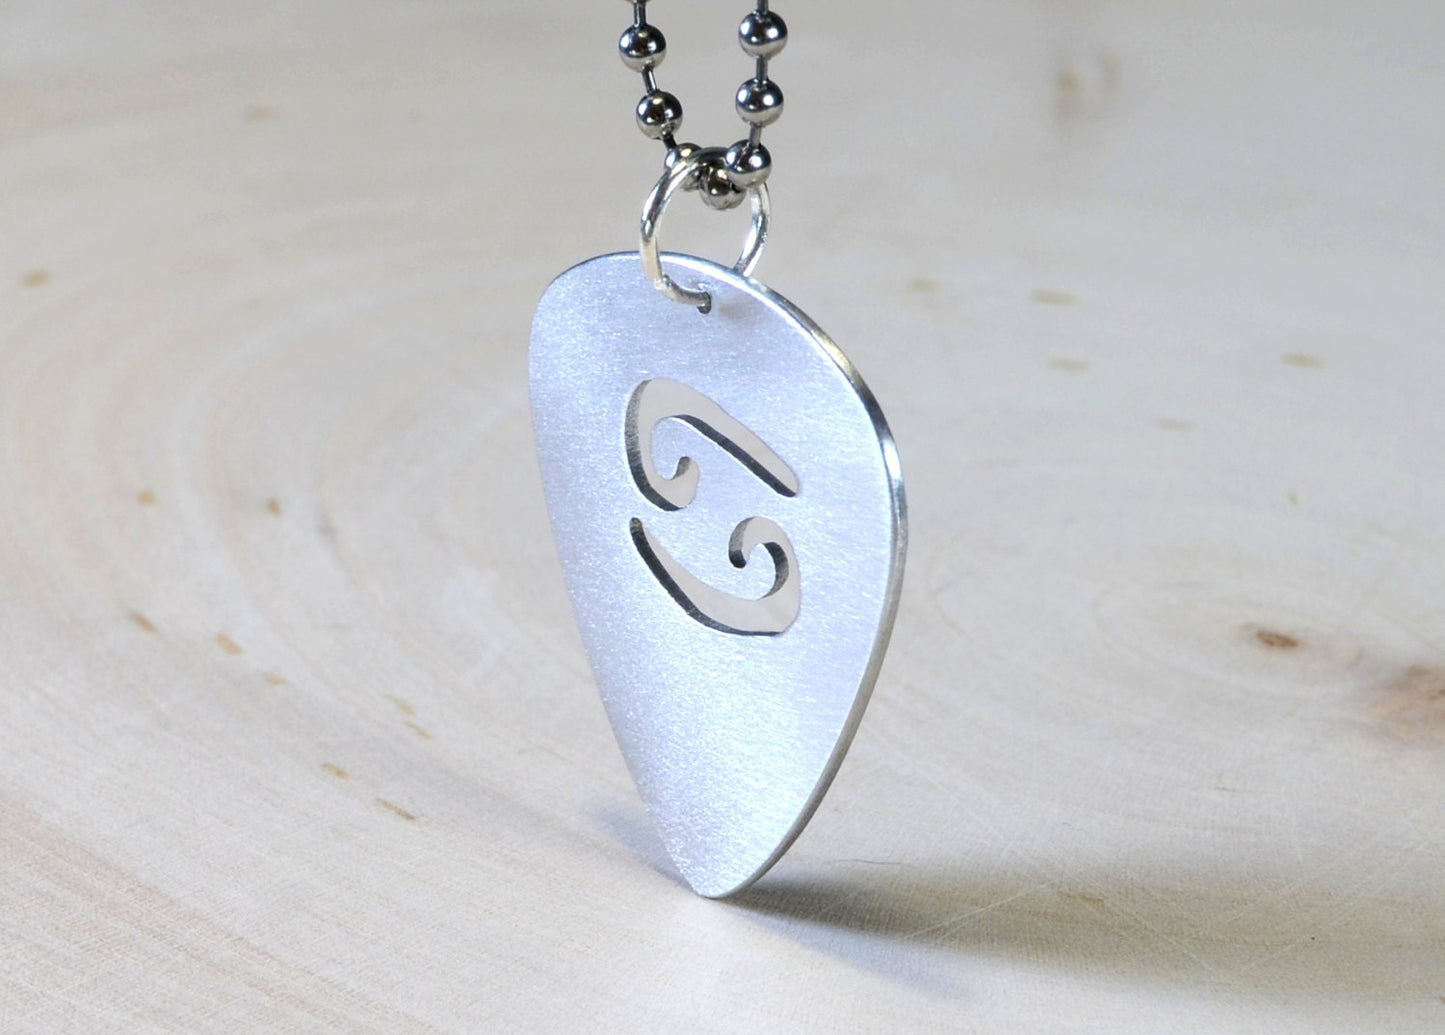 Zodiac sign guitar pick necklace with personalized astrology theme in various metals